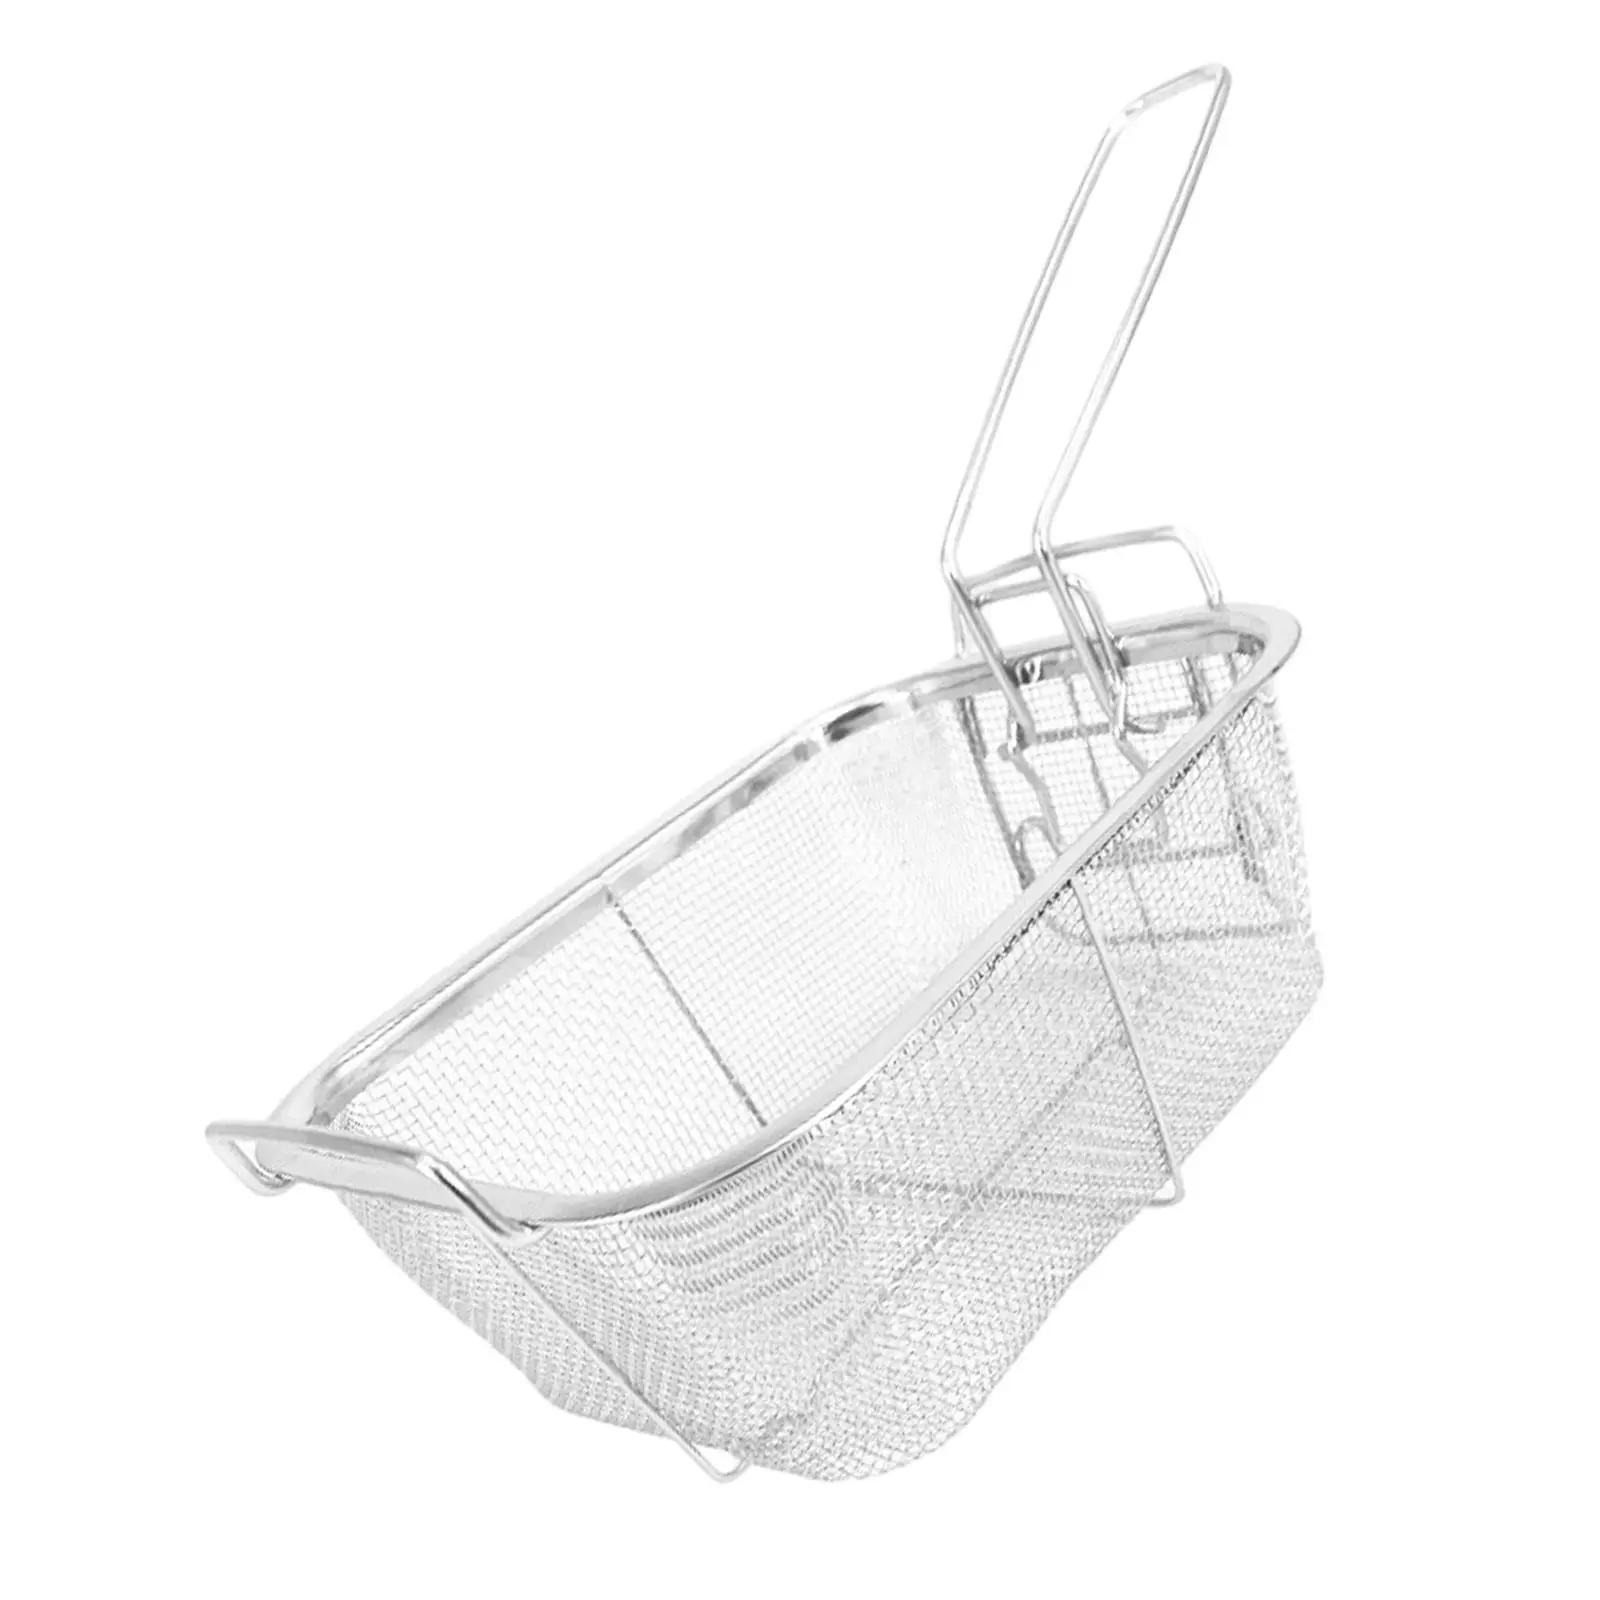 Mesh French Fry Chips Basket with Handle French Fries Holder Square Fryer Basket for Kitchen Cafe Chips Barbecue Restaurant